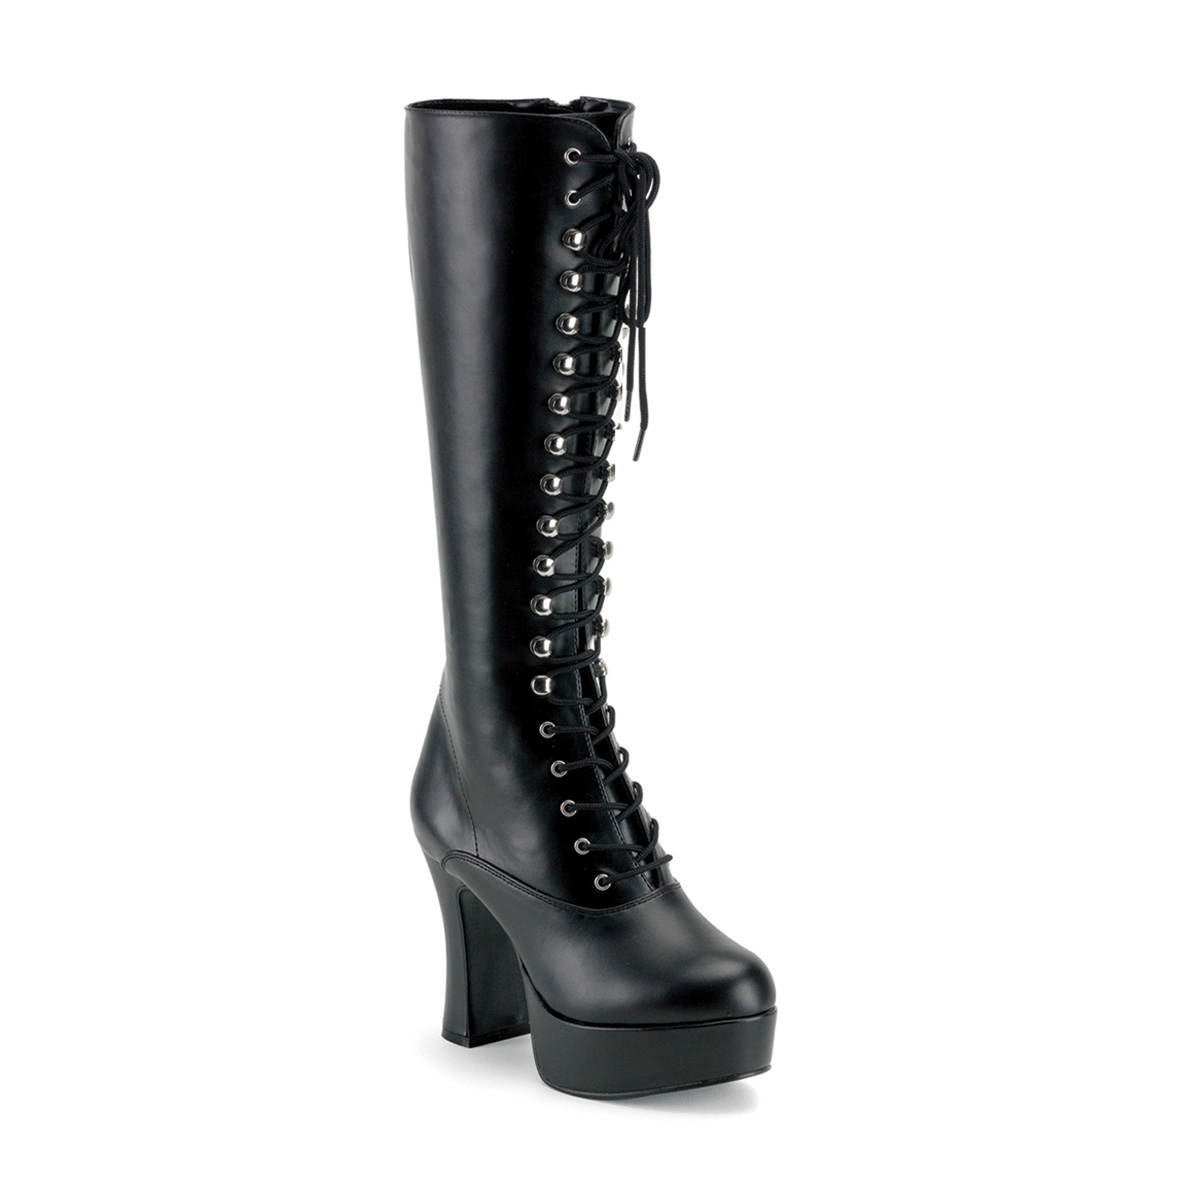 Black matte 4" ankle lace up costume boots